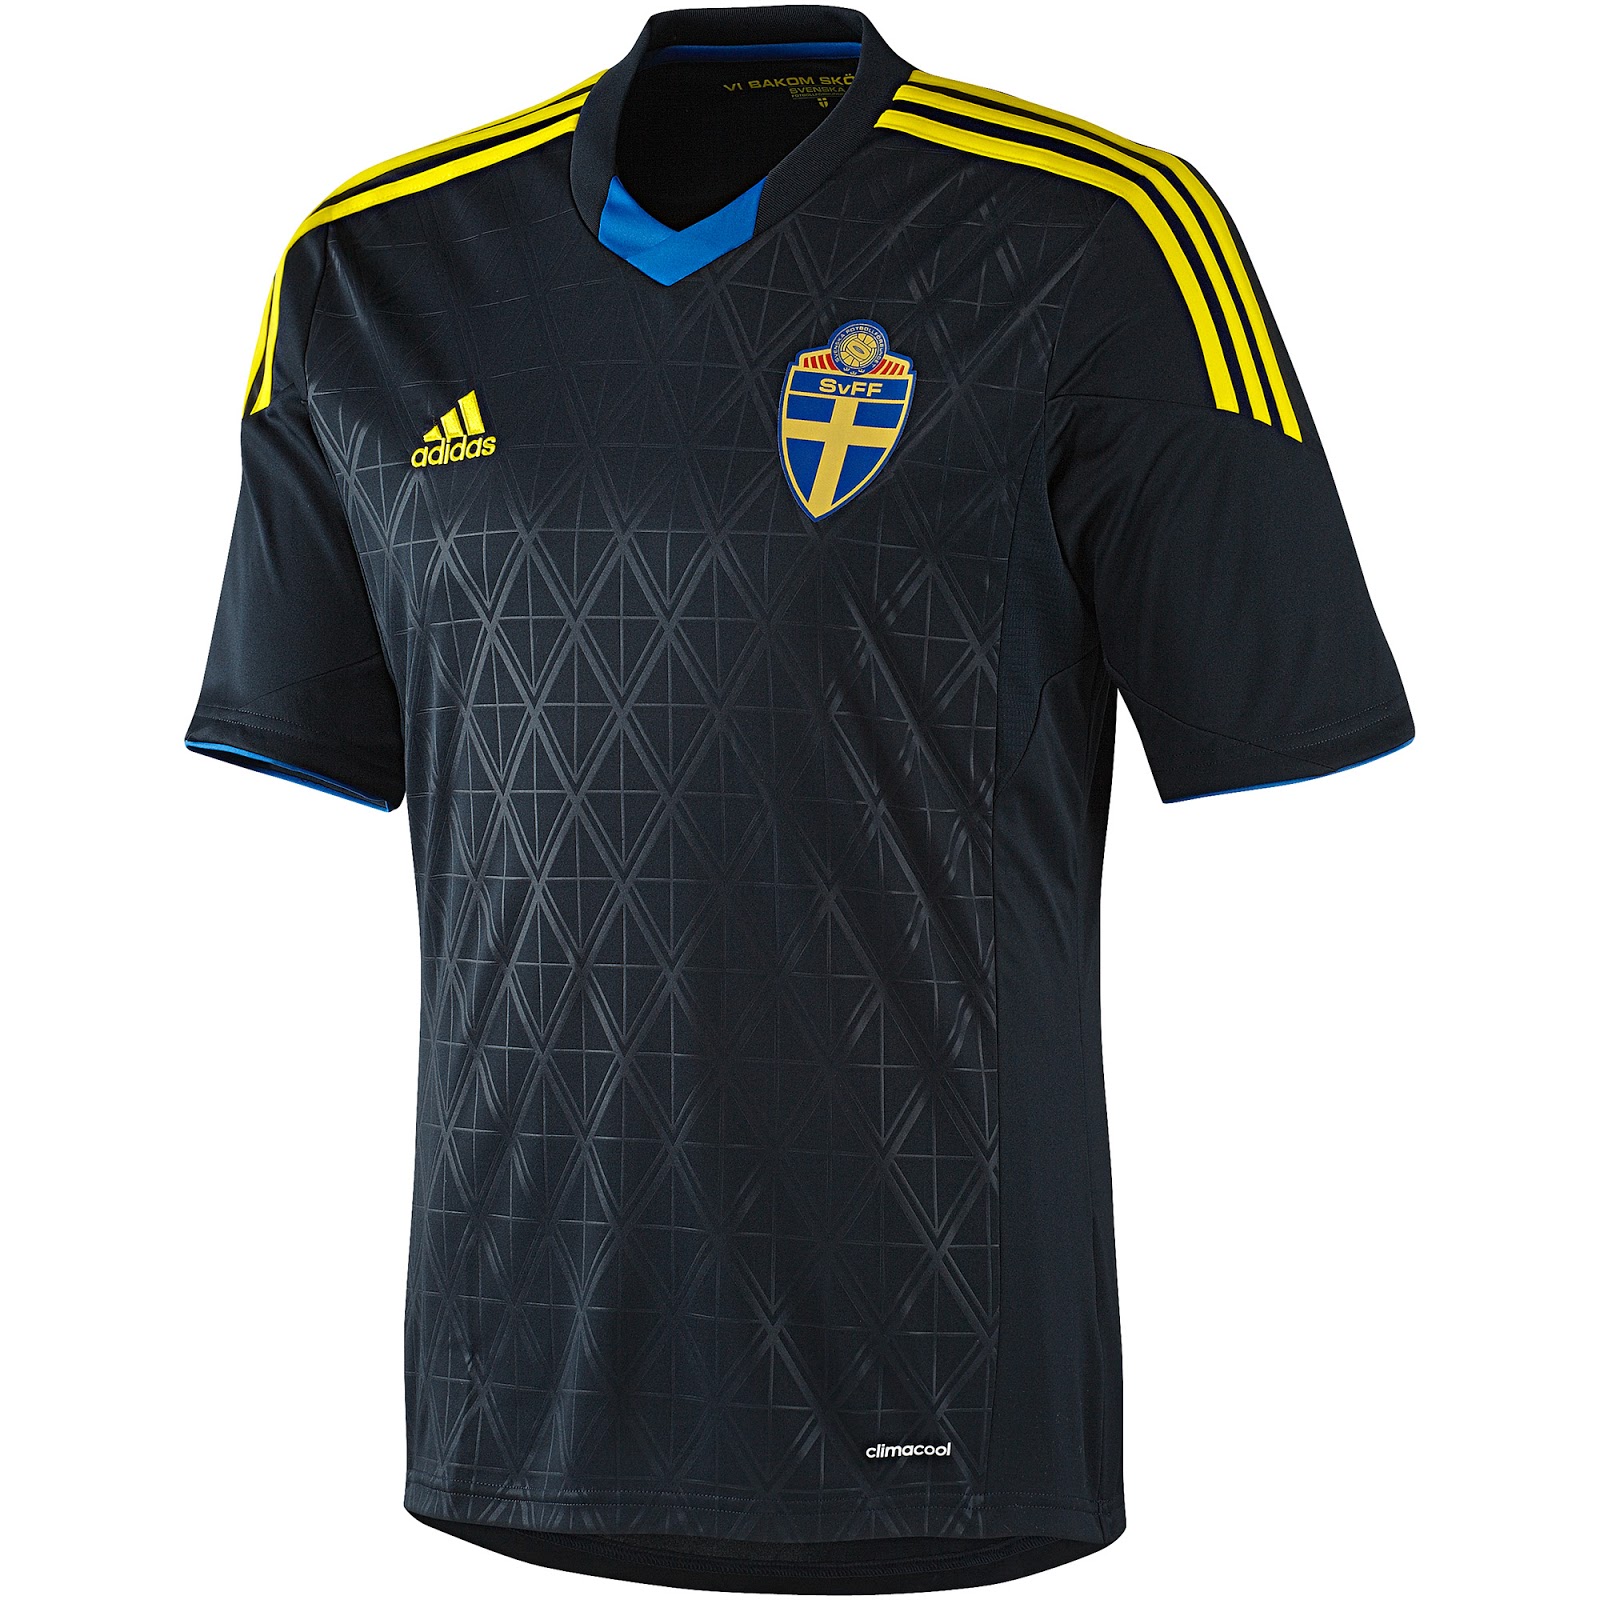 Download Sweden 13-14 Adidas Shirts Released - Footy Headlines